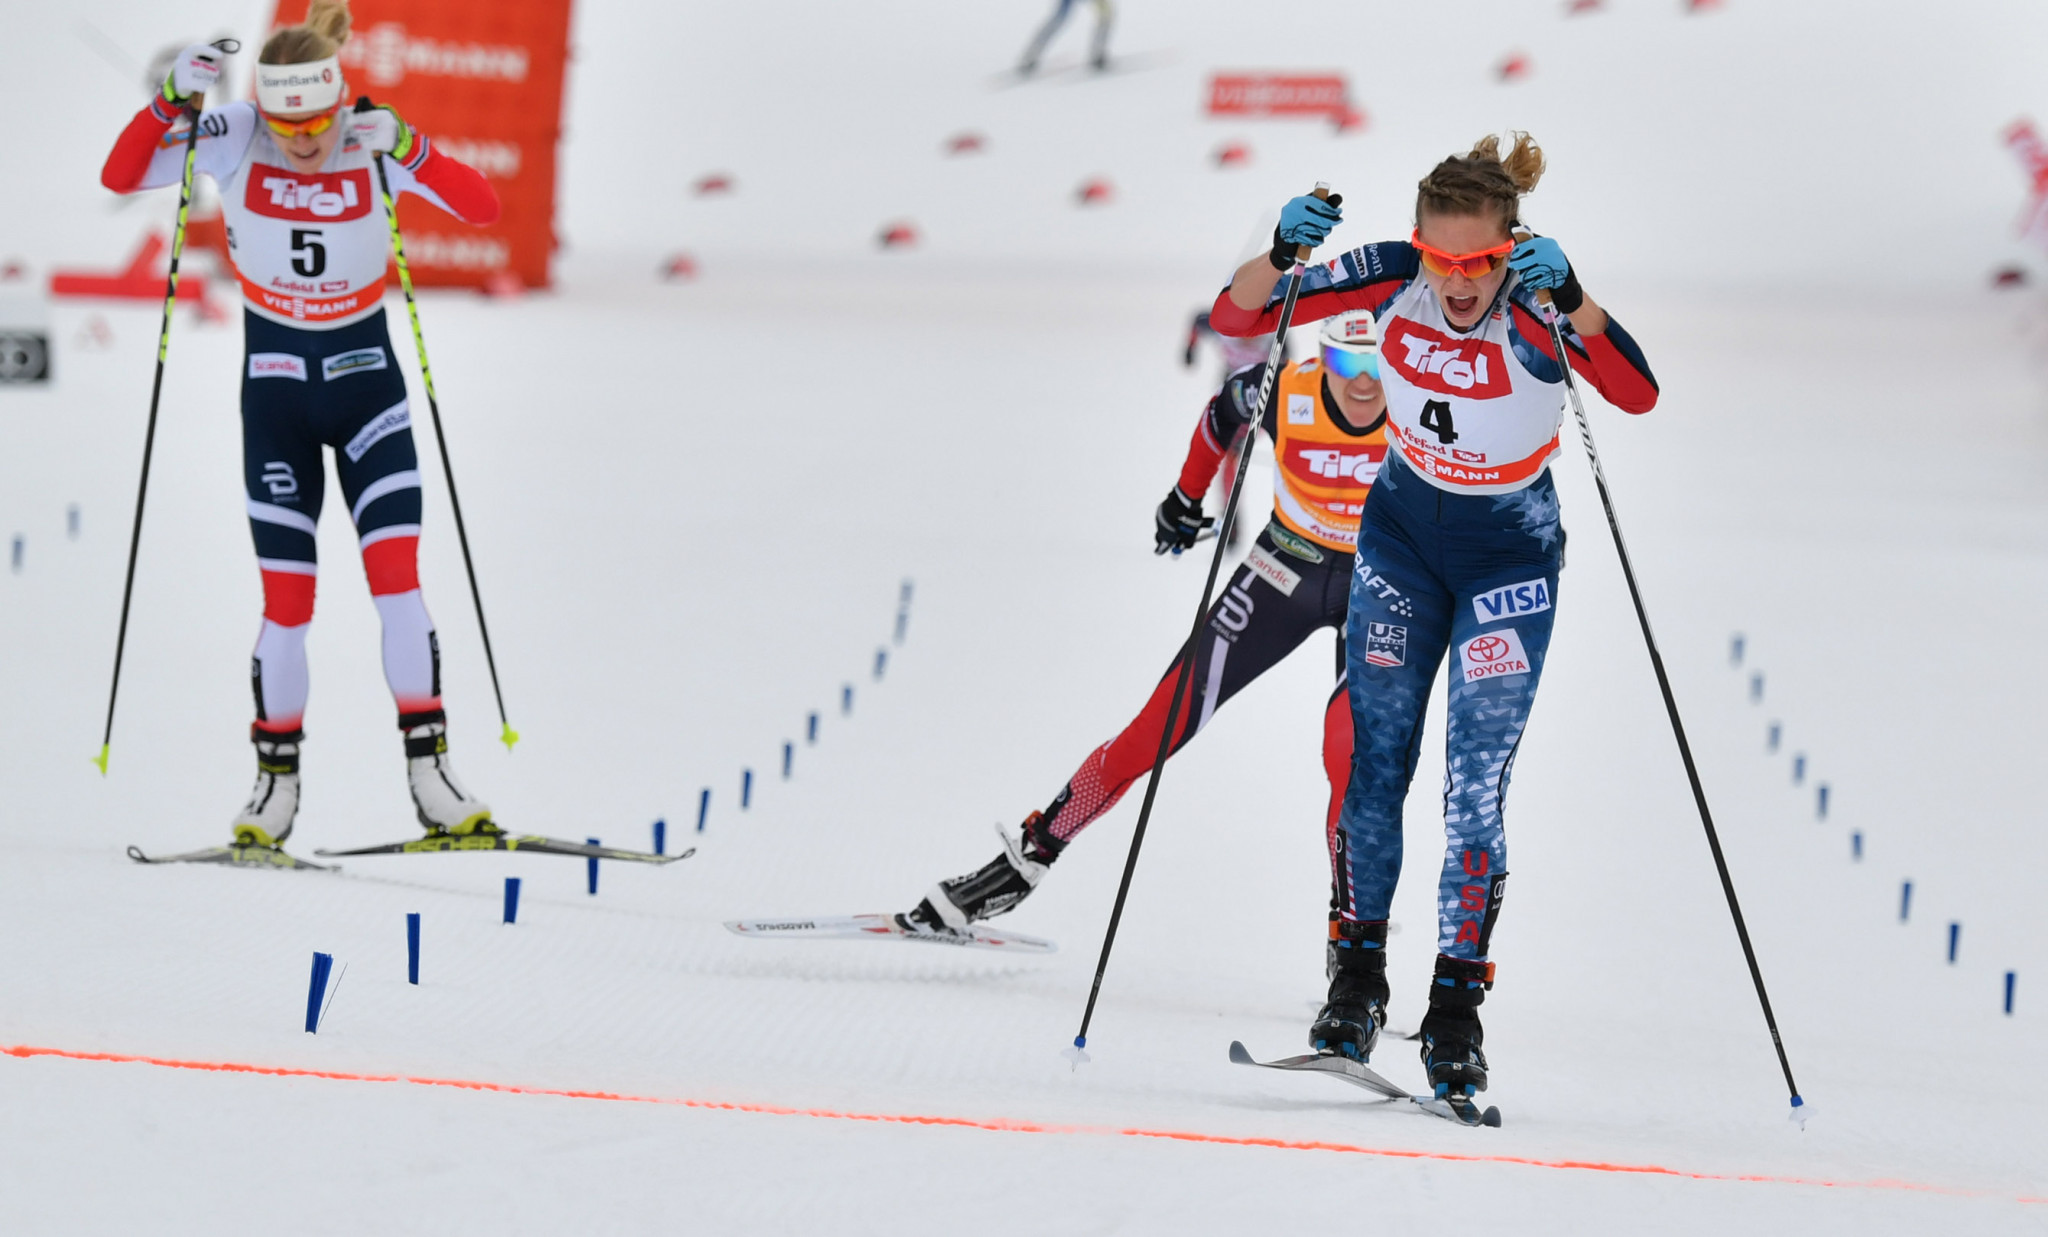 Diggins and Cologna win final FIS Cross-Country World Cup races before Pyeongchang 2018